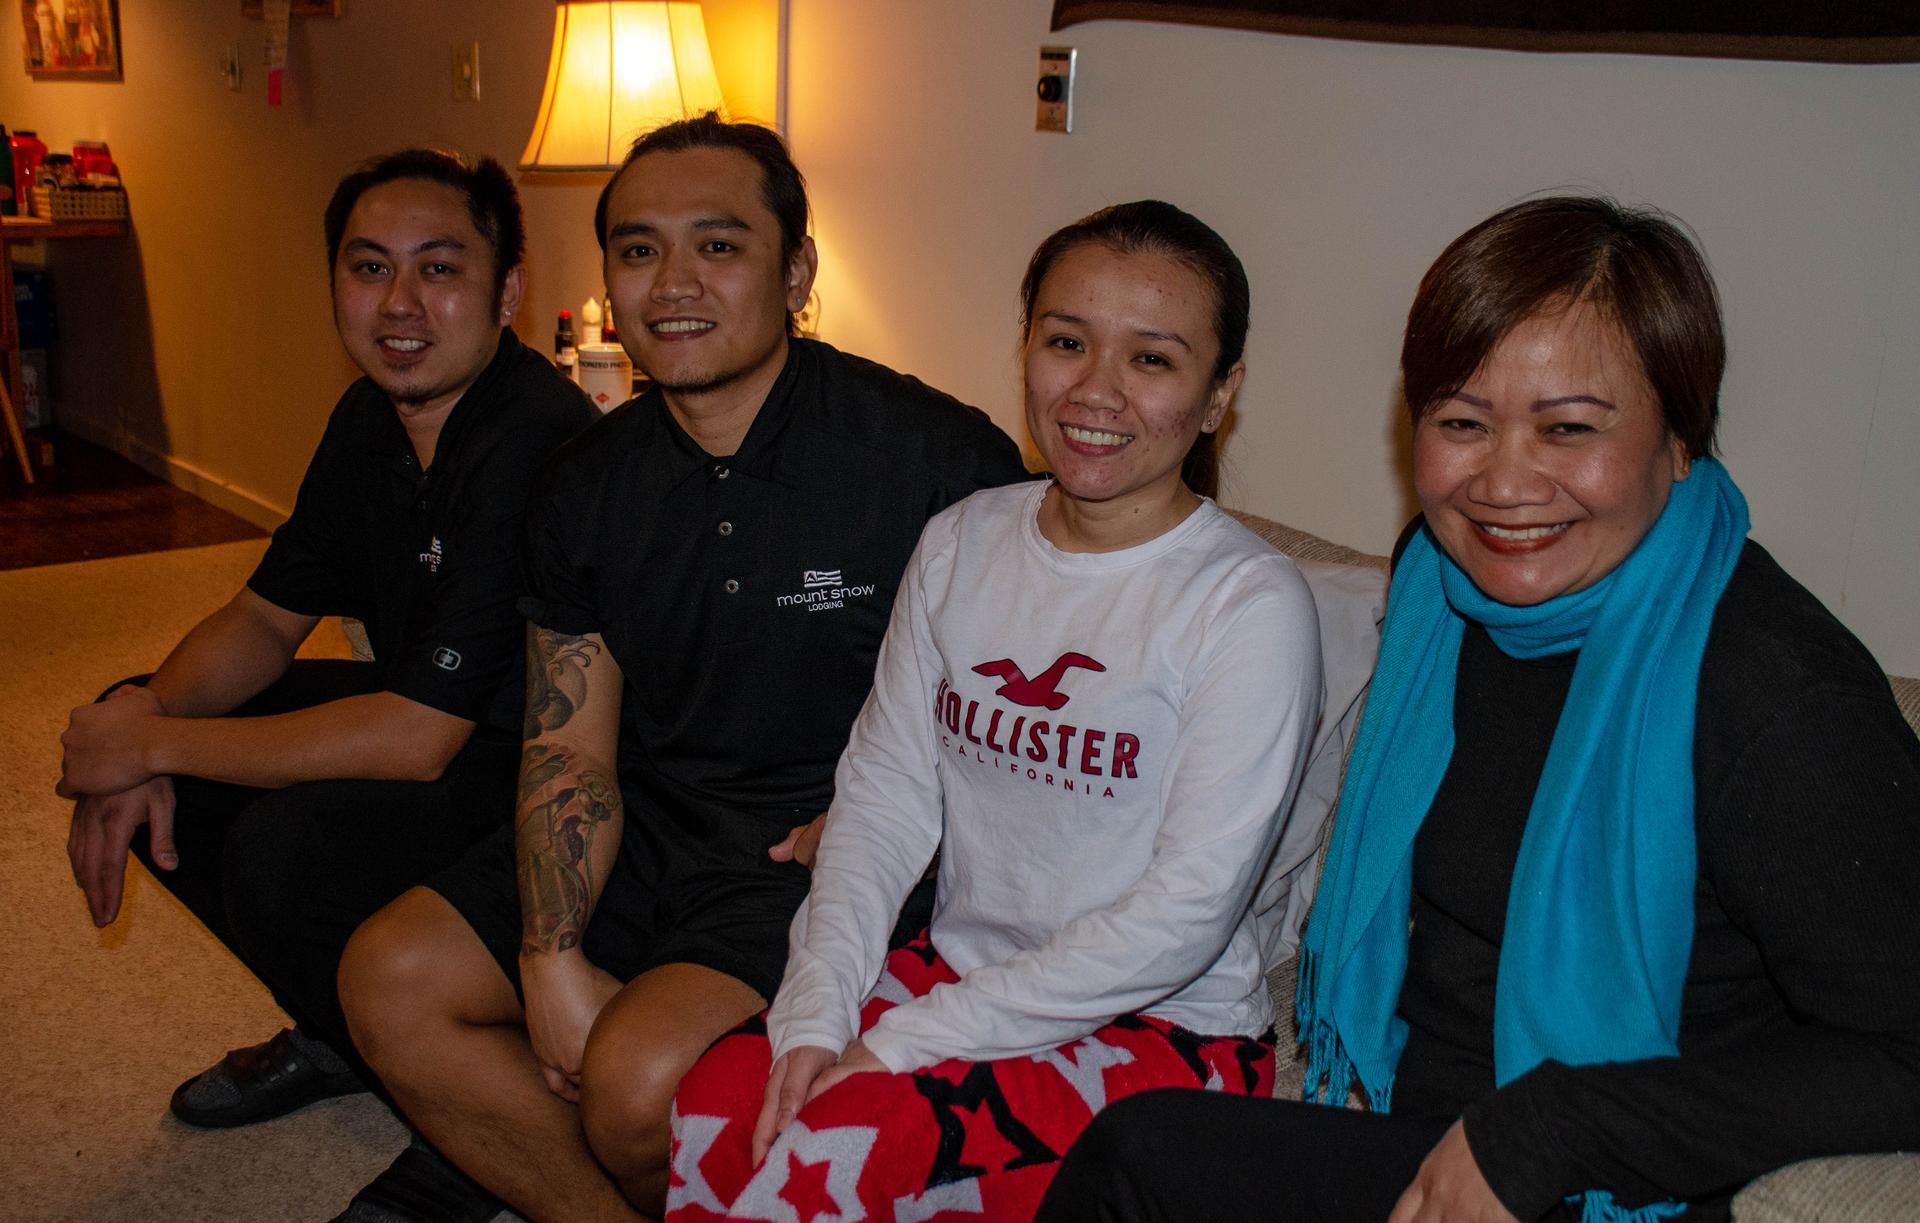 The Tamayo family poses for a group photo at their winter apartment in southern Vermont. They had been planning to move to Cape Cod in mid-April for their summer jobs. From left: Smart Sabangan, Rayben Tamayo, Yazel Ruth Tamayo-Sabangan, and Yolanda Tamay